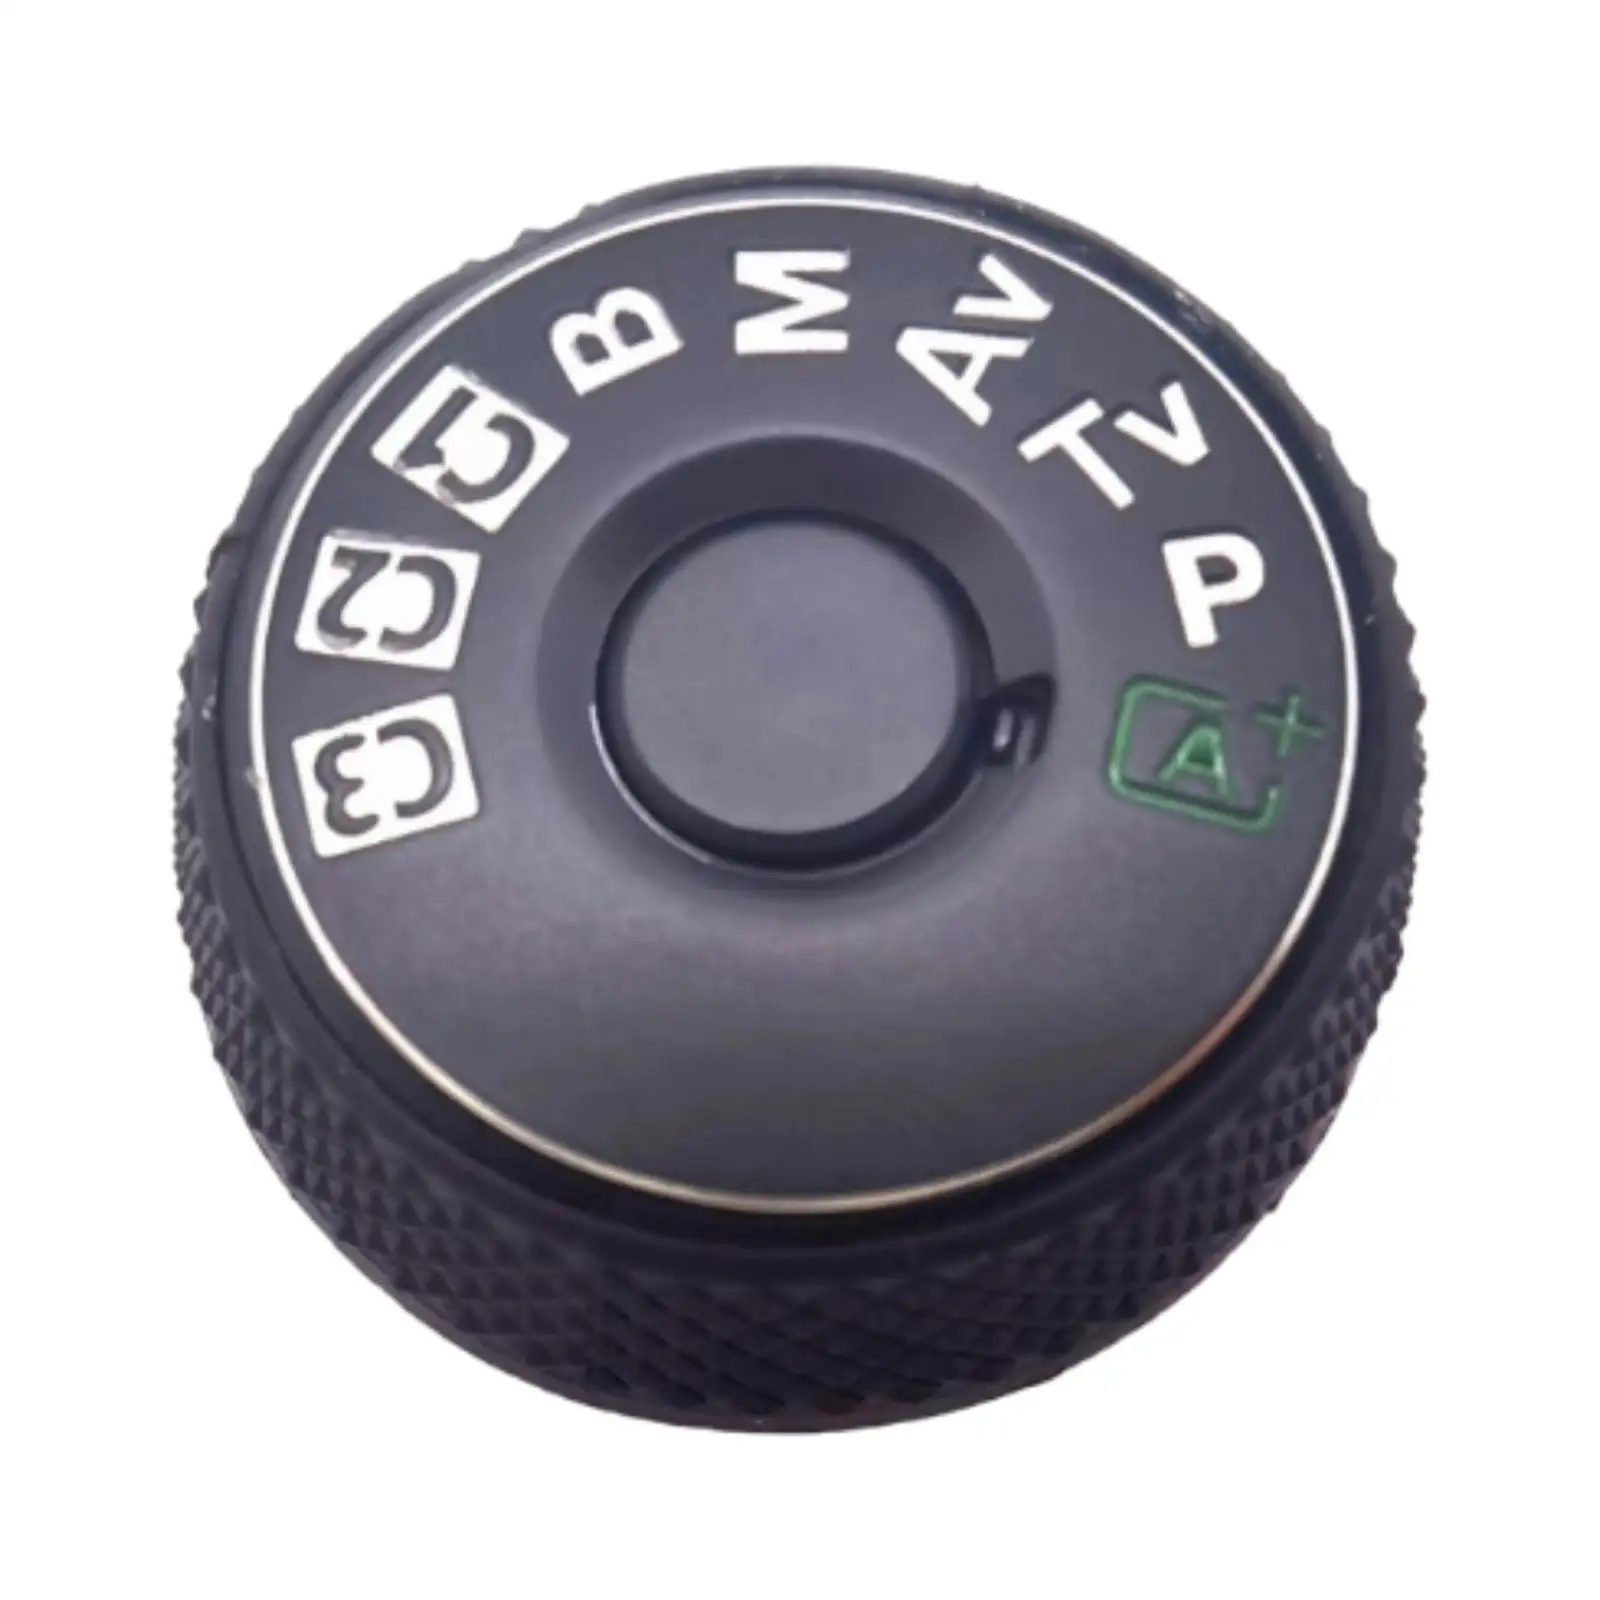 Function Dial Model Button Replacement Digital Camera Repair Part for Canon 5D4 Quality High Reliability Easy to Install Premium